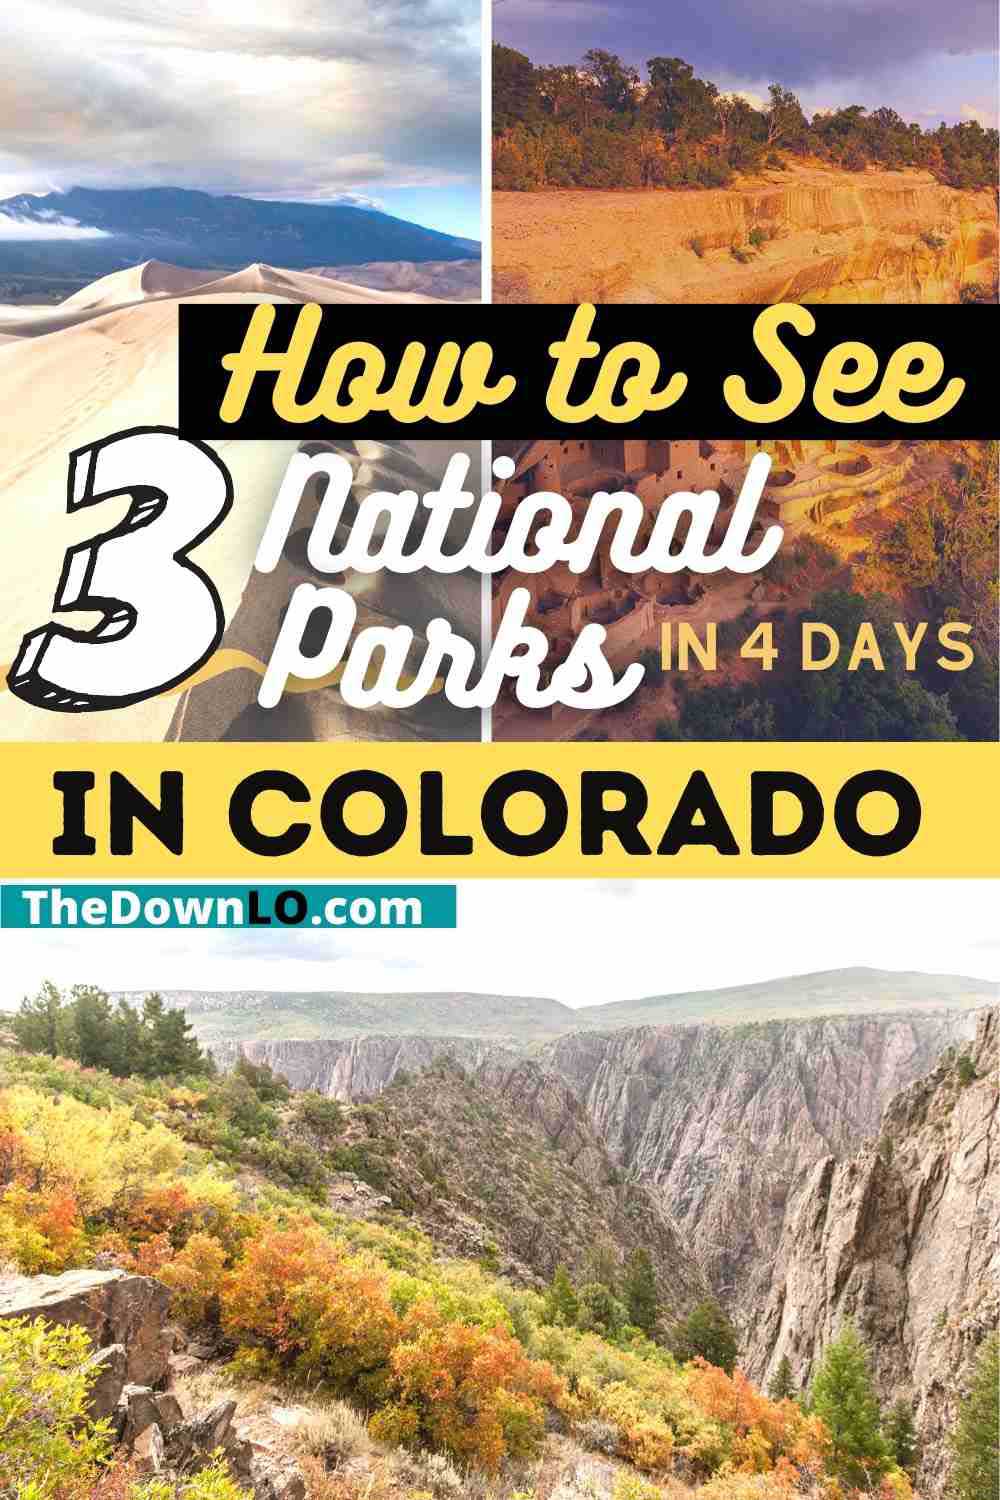 southern national parks road trip